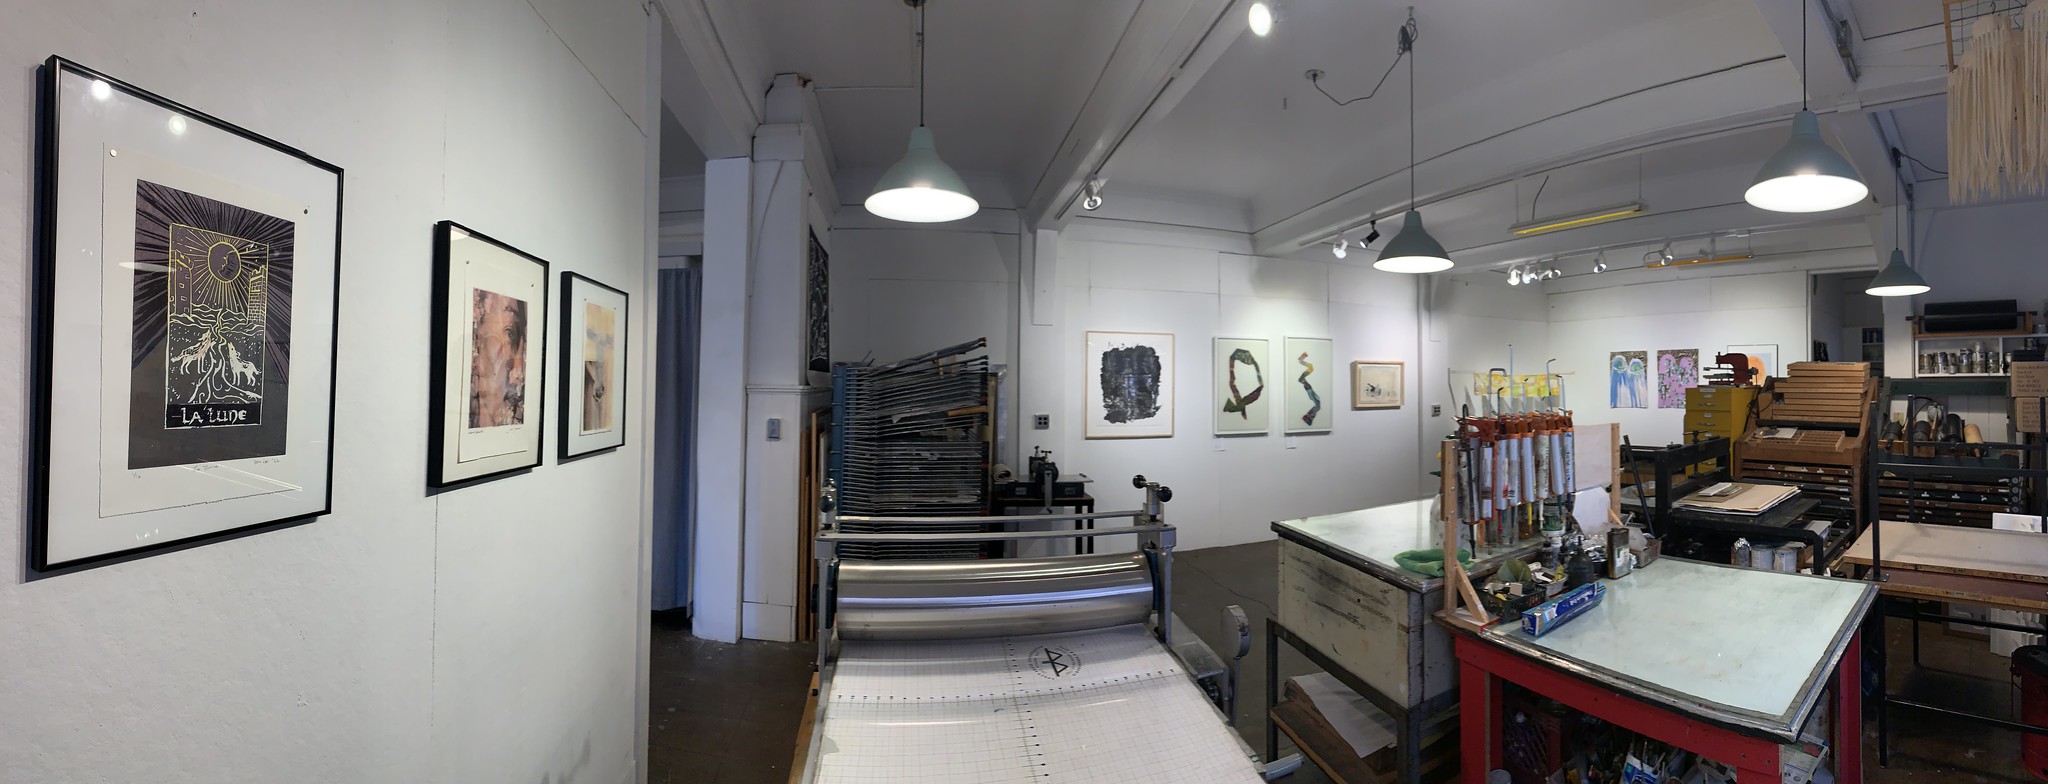 panorama of the Ink Shop studio gallery